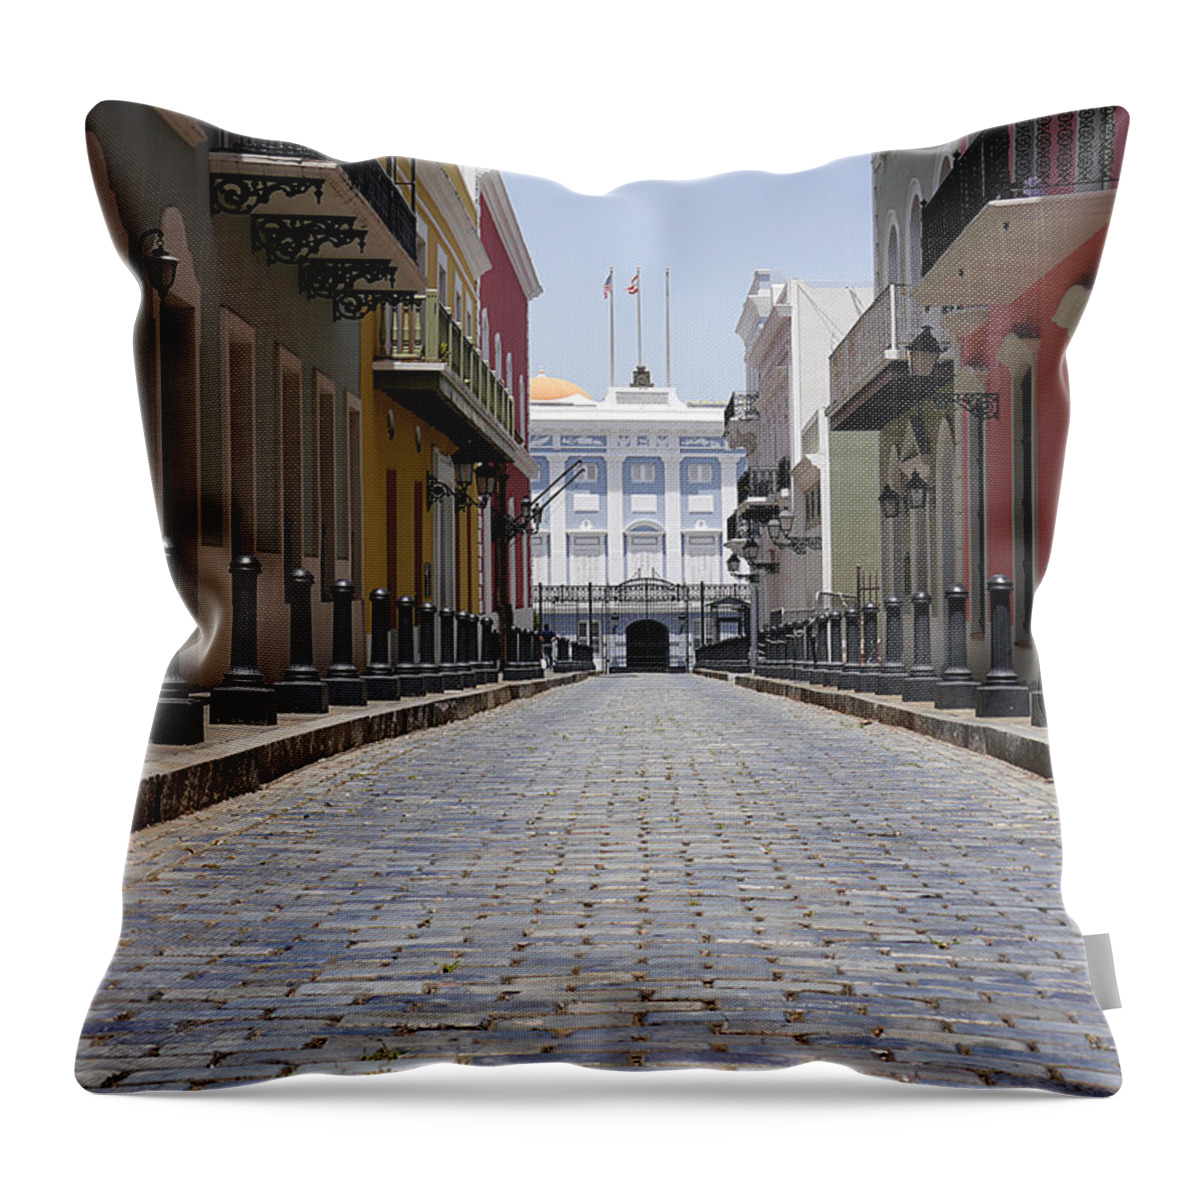 Richard Reeve Throw Pillow featuring the photograph Old San Juan - Calle Fortaleza by Richard Reeve